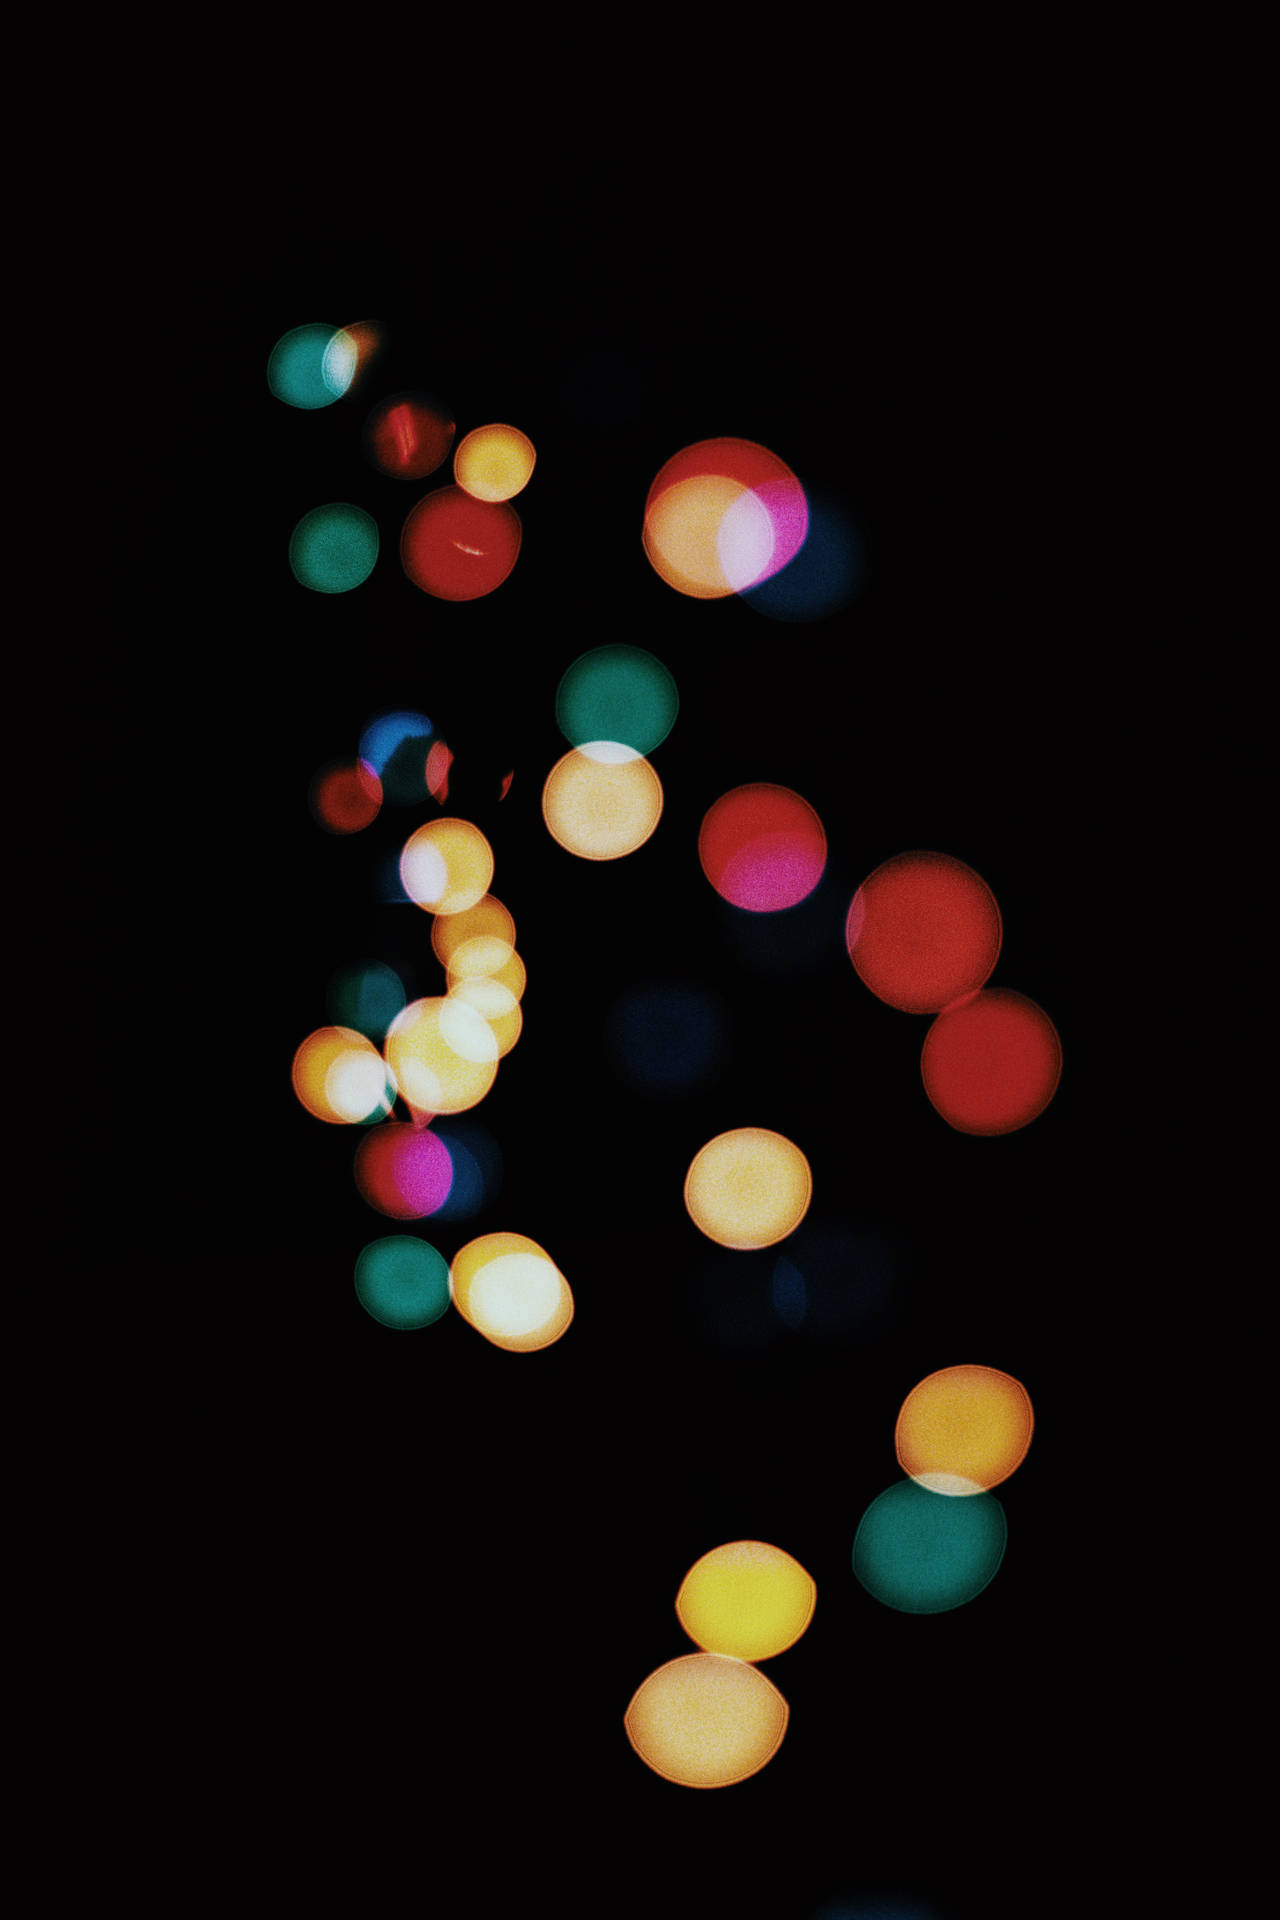 Iphone Home Screen Colorful Light Orbs Background